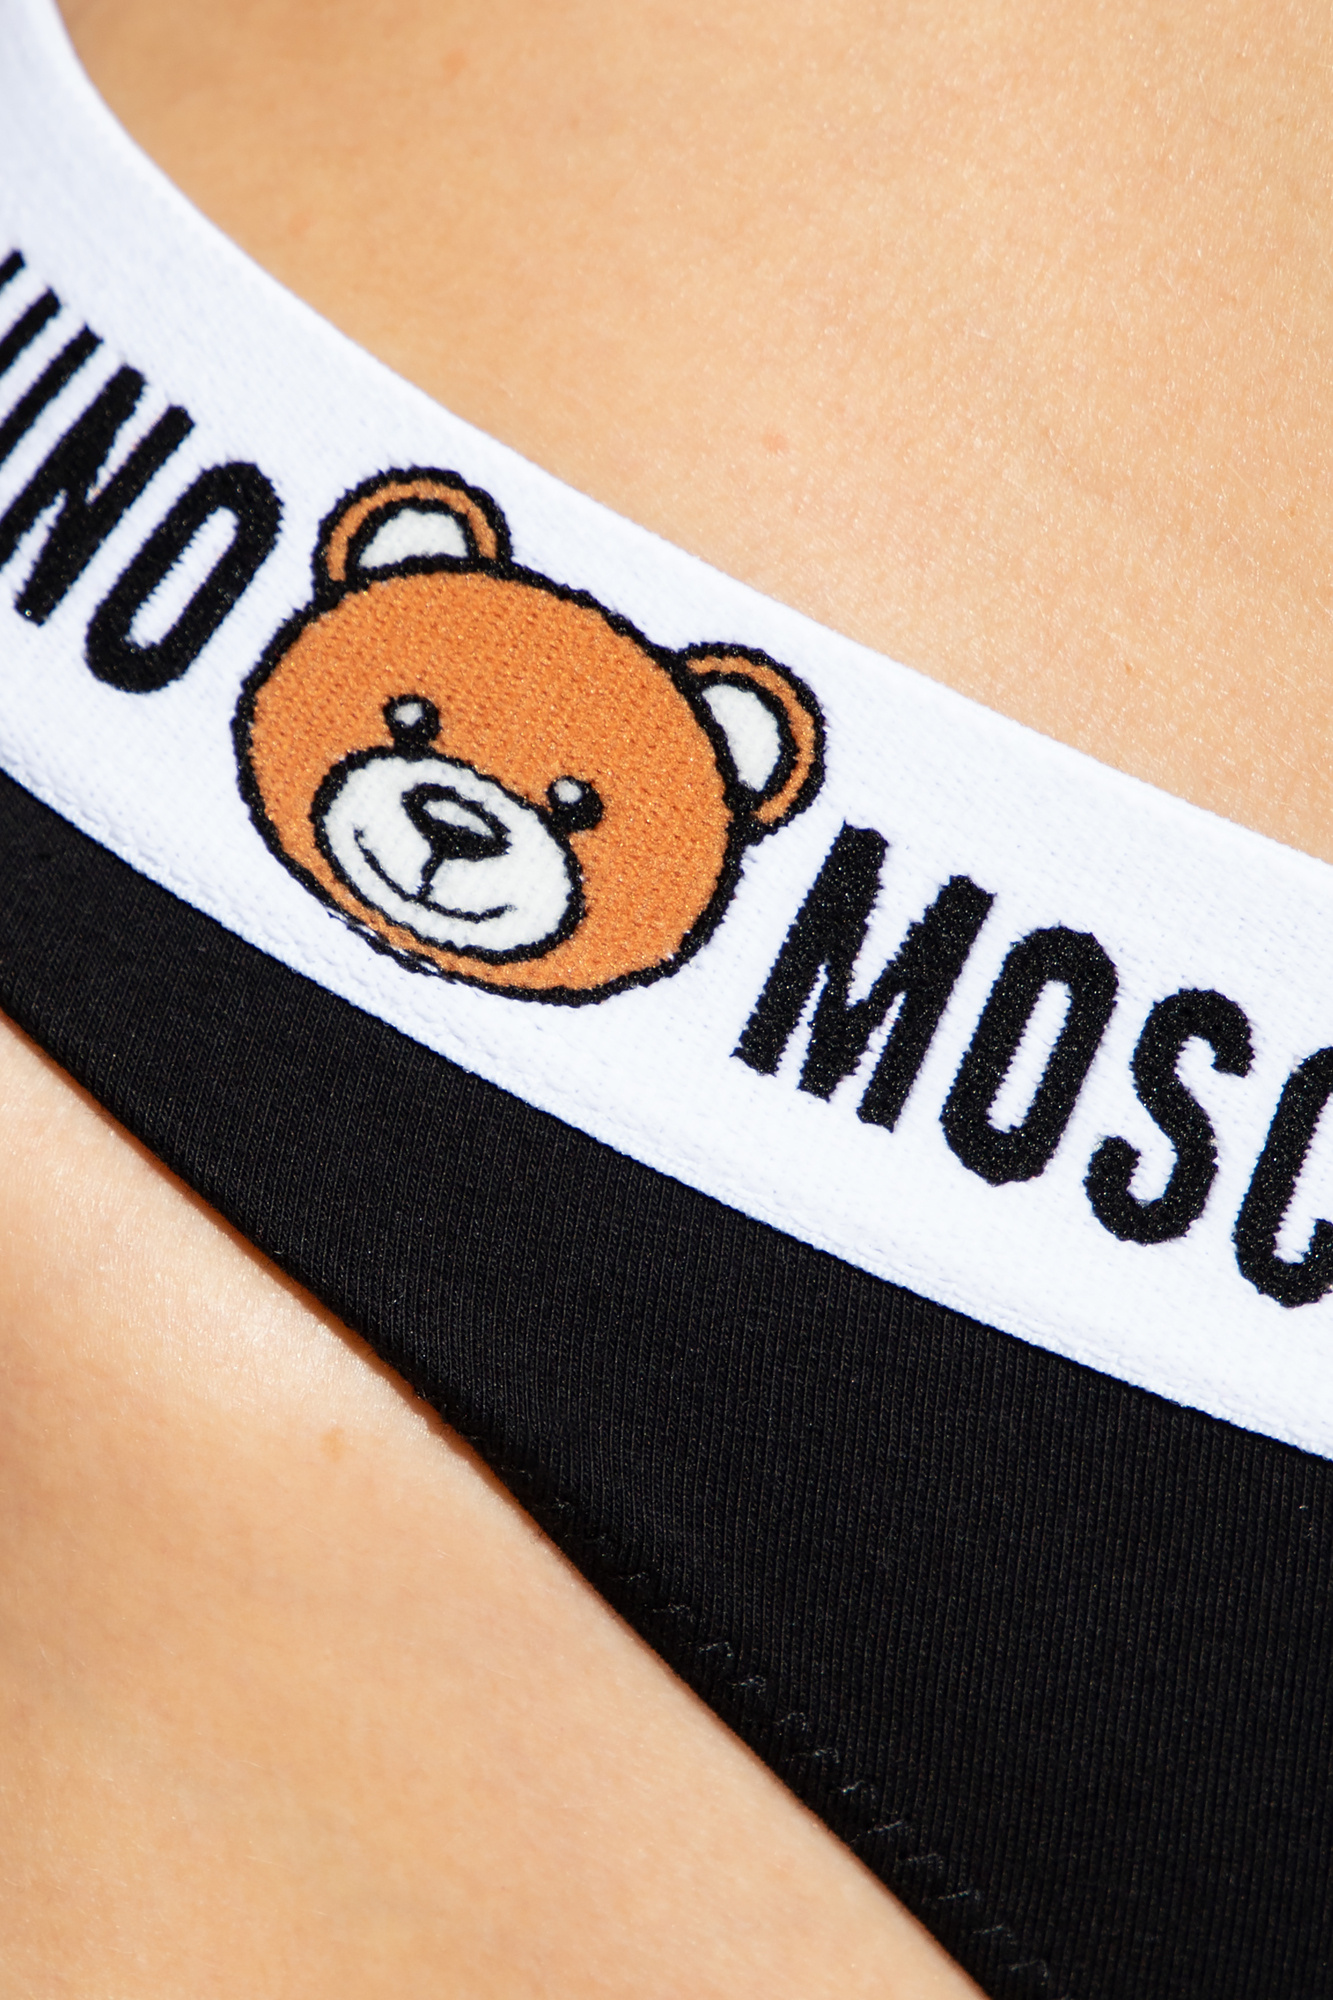 Moschino Branded thong 2-pack, Women's Clothing